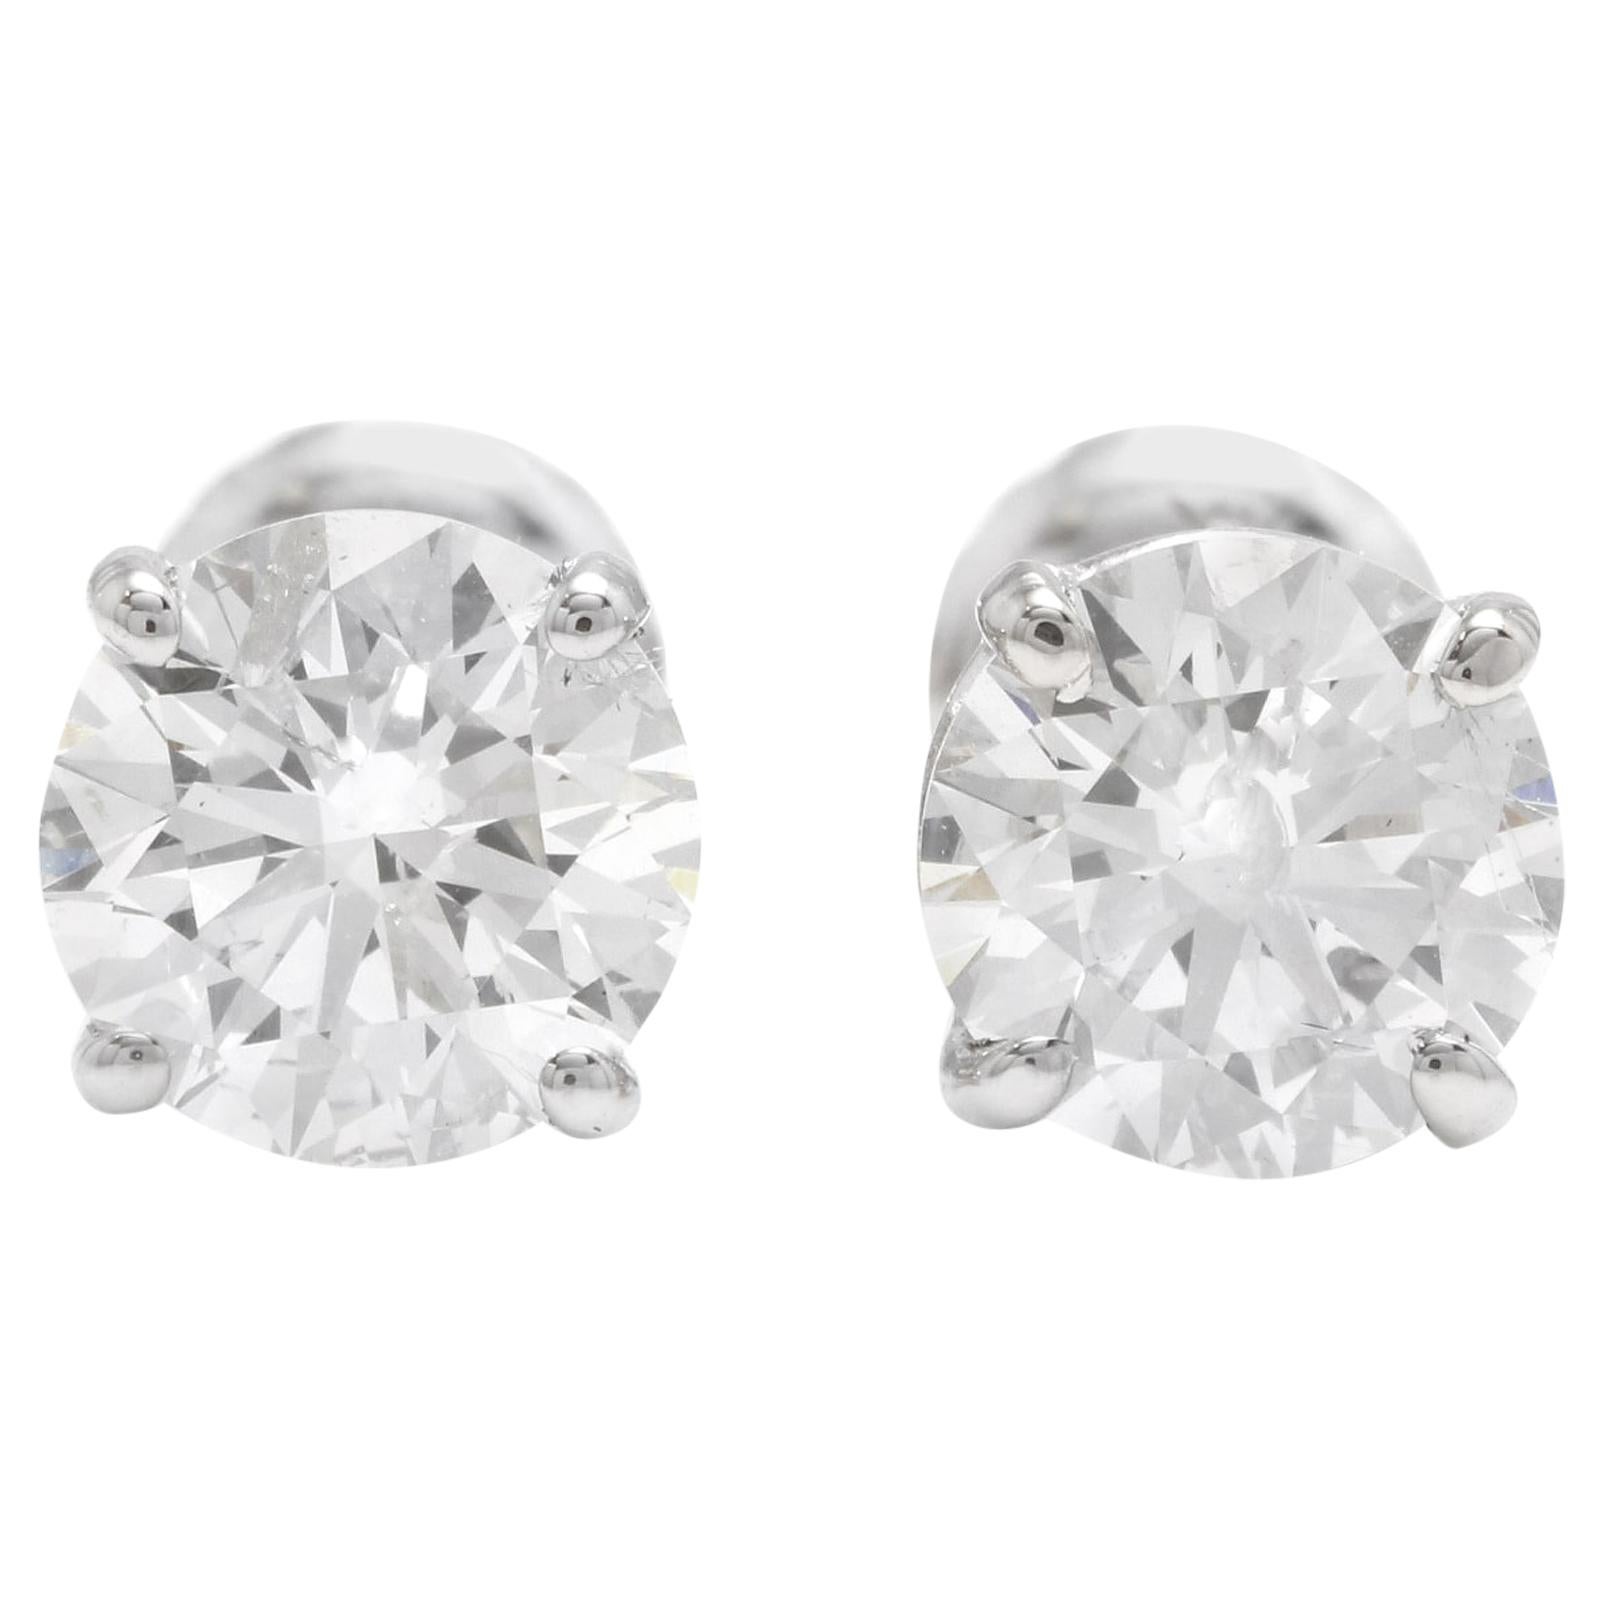 Exquisite 0.60 Carat Natural Diamond 14 Karat Solid White Gold Stud Earrings For Sale